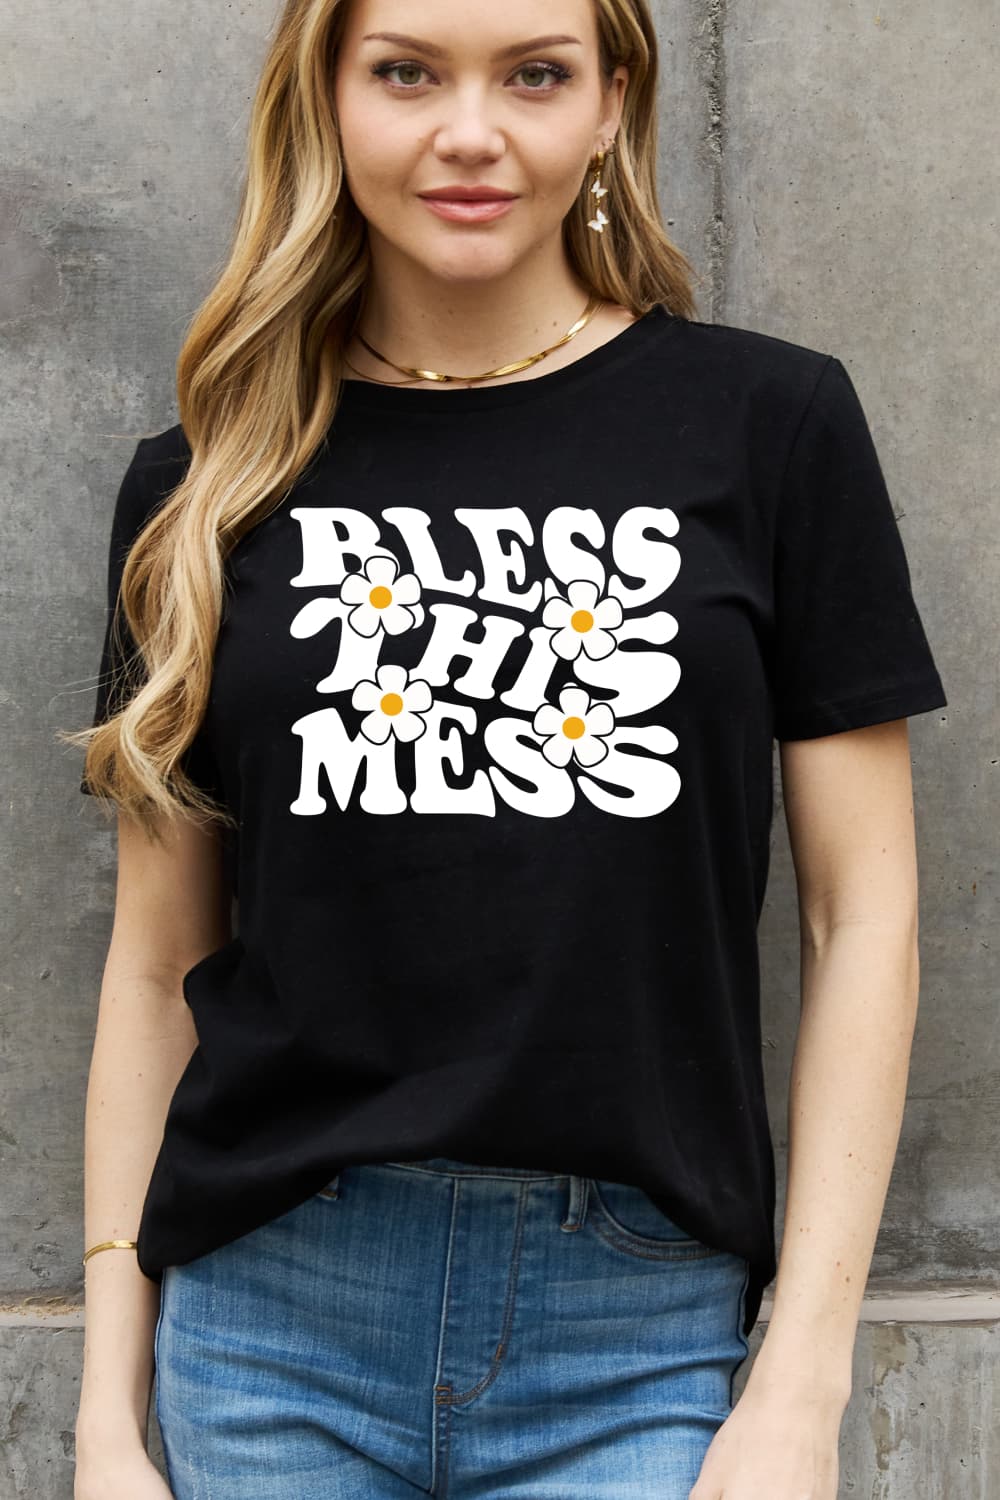 Love Full Size Bless This Mess Graphic Cotton Tee